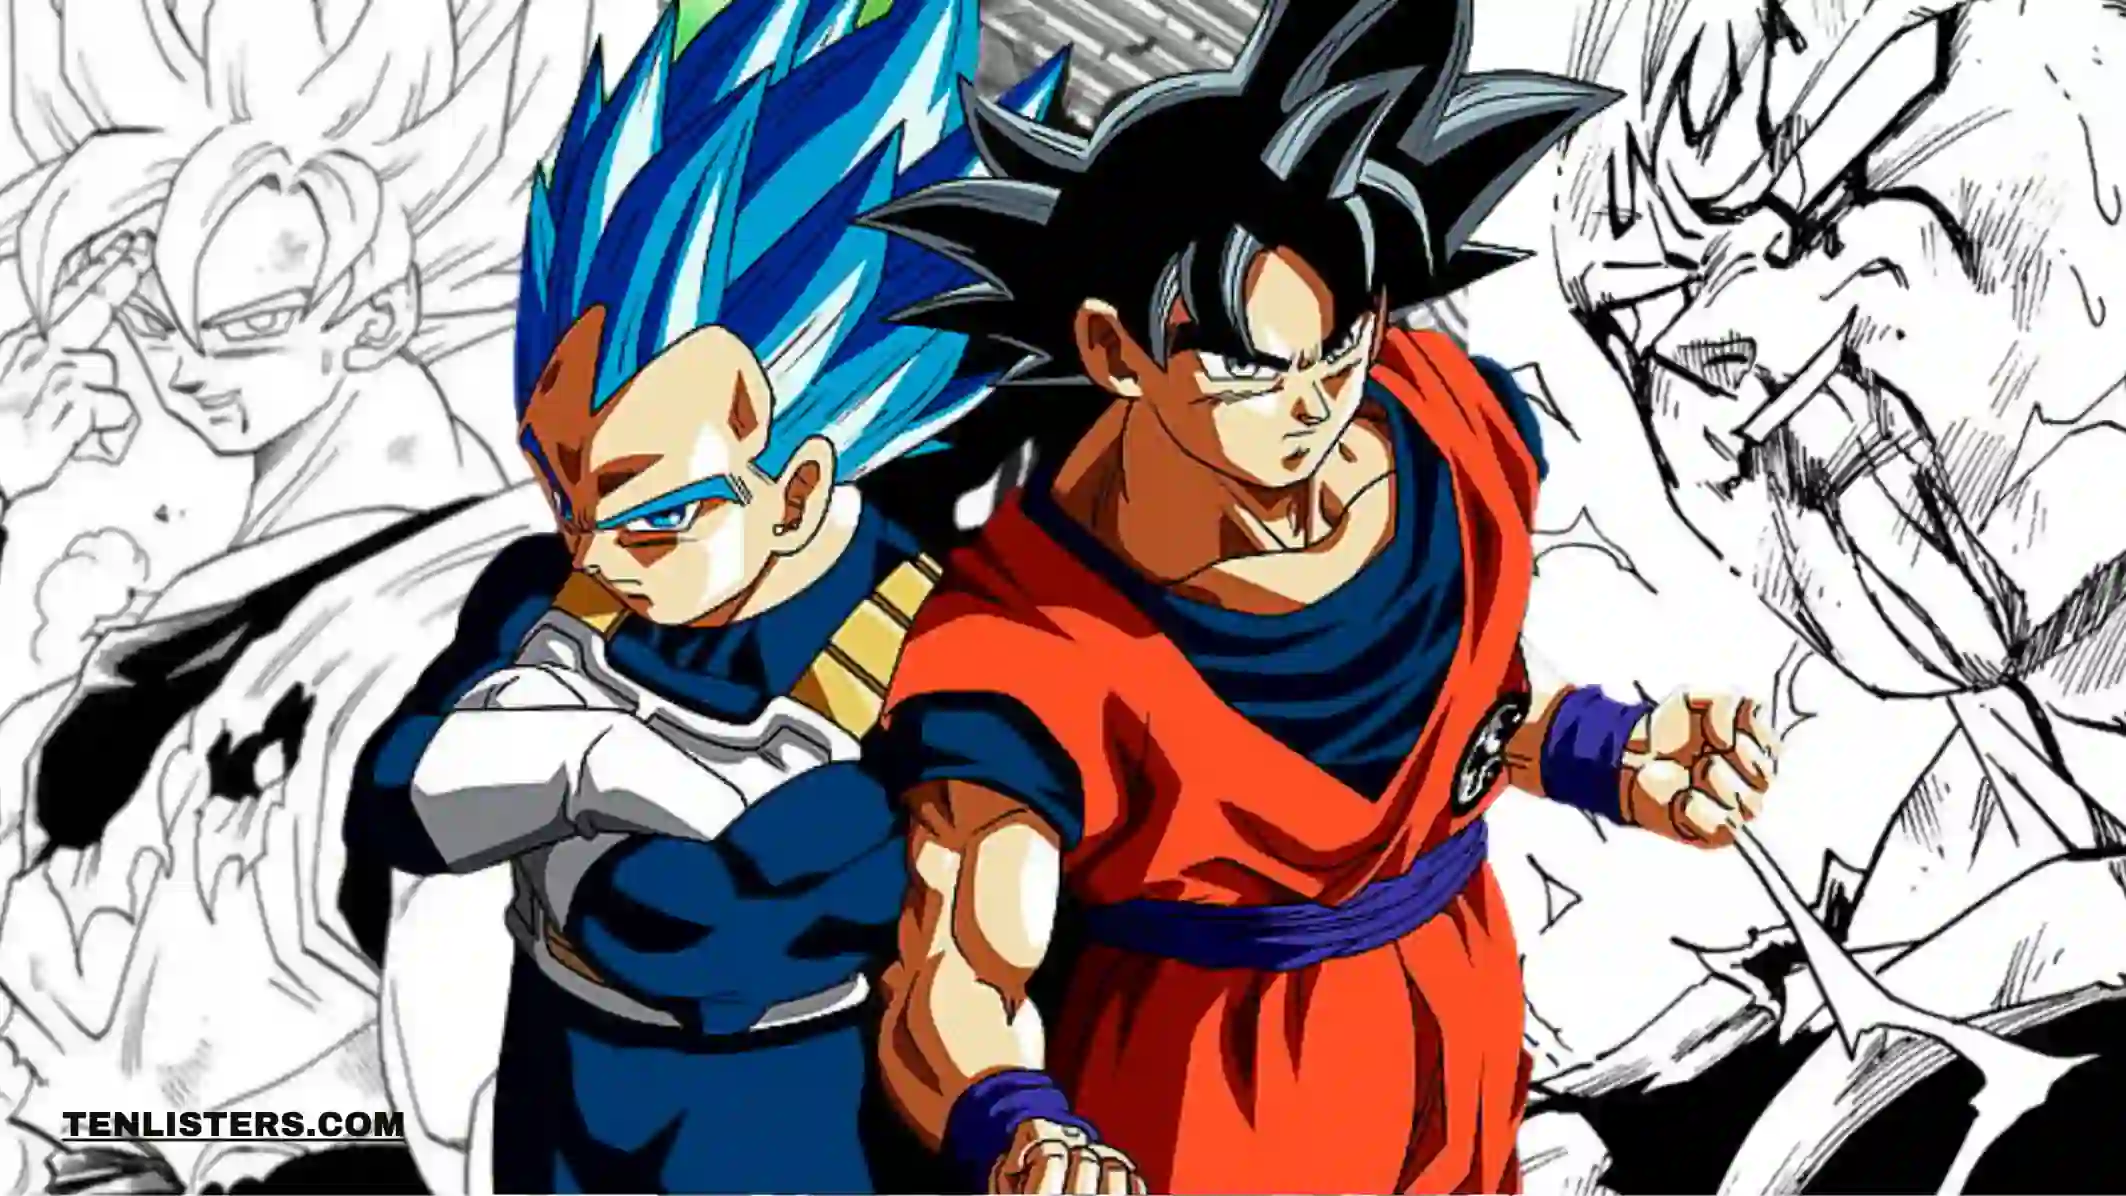 Analyzing the Significance of Costumes in Dragon Ball Super Season 2